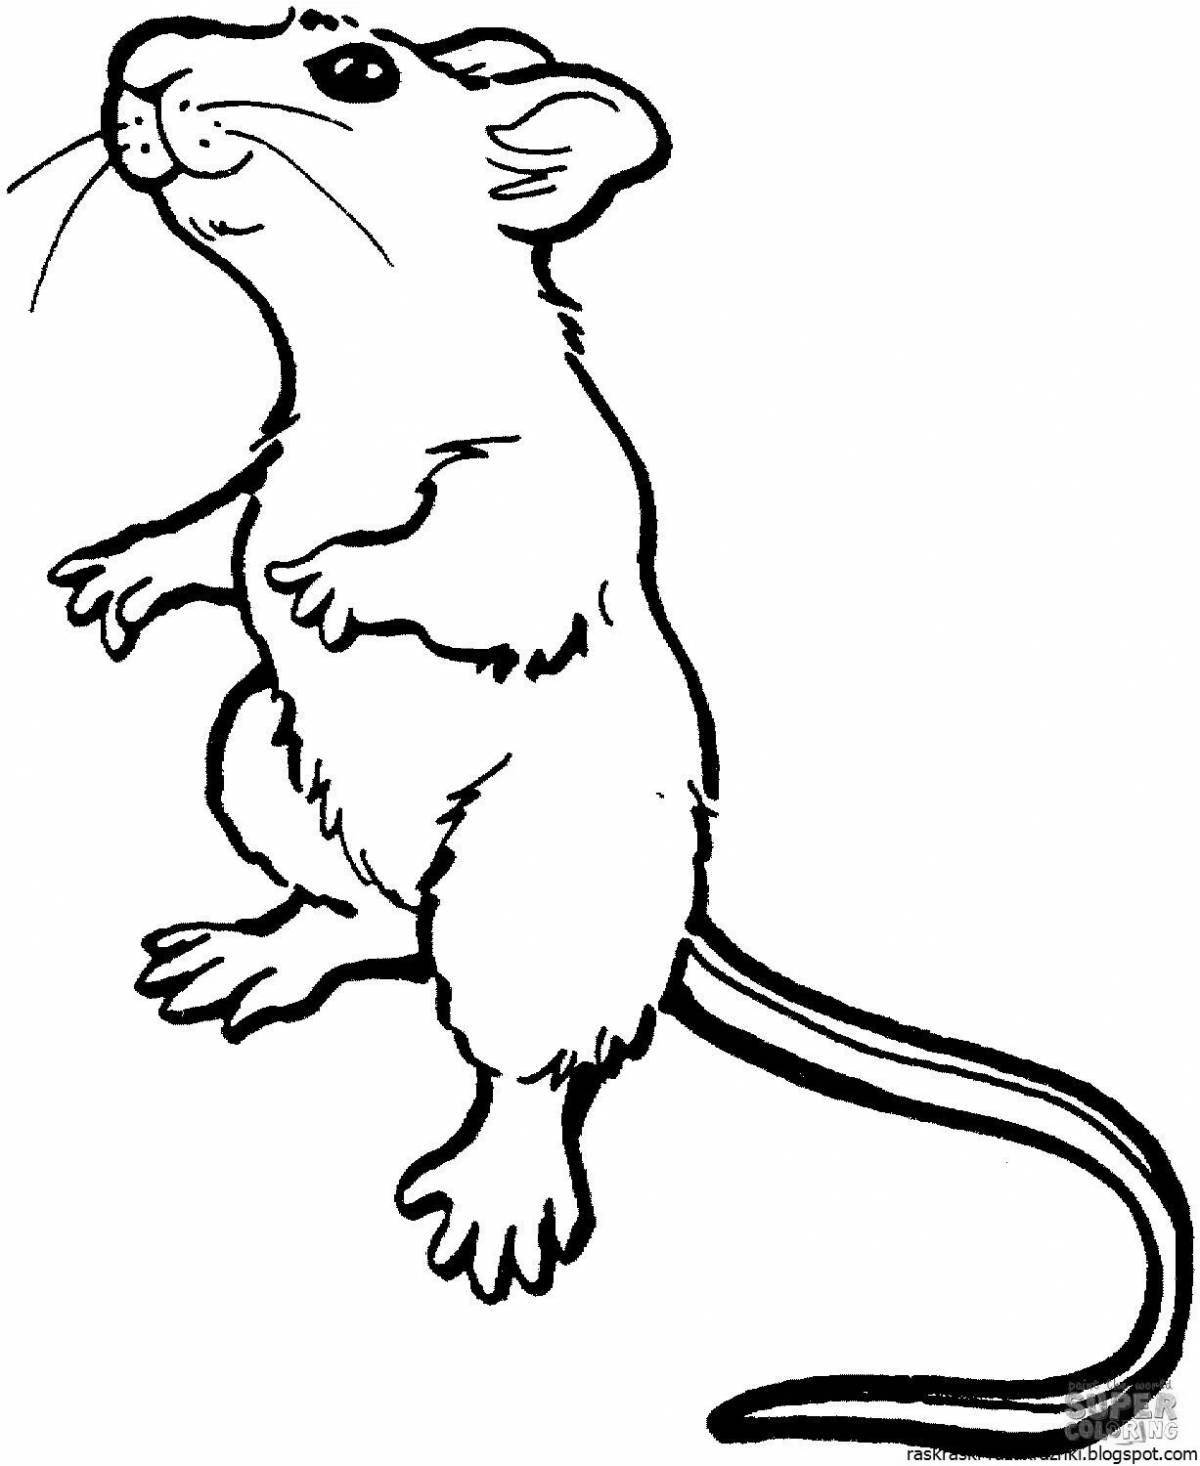 Coloring page playful mouse